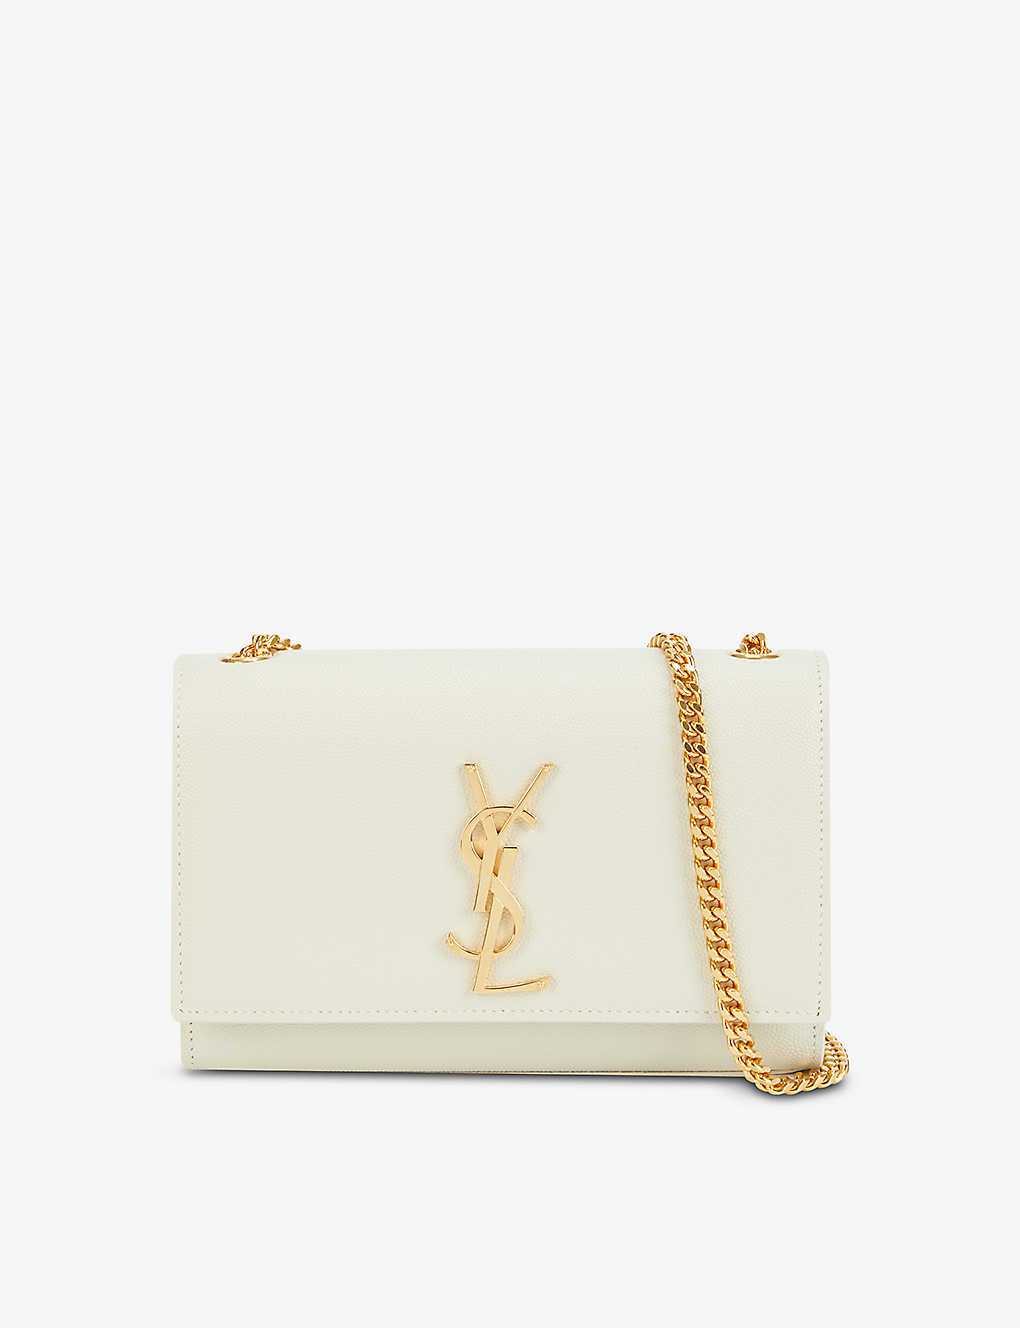 Saint Laurent Kate Small Leather Cross-body Bag In Crema Soft